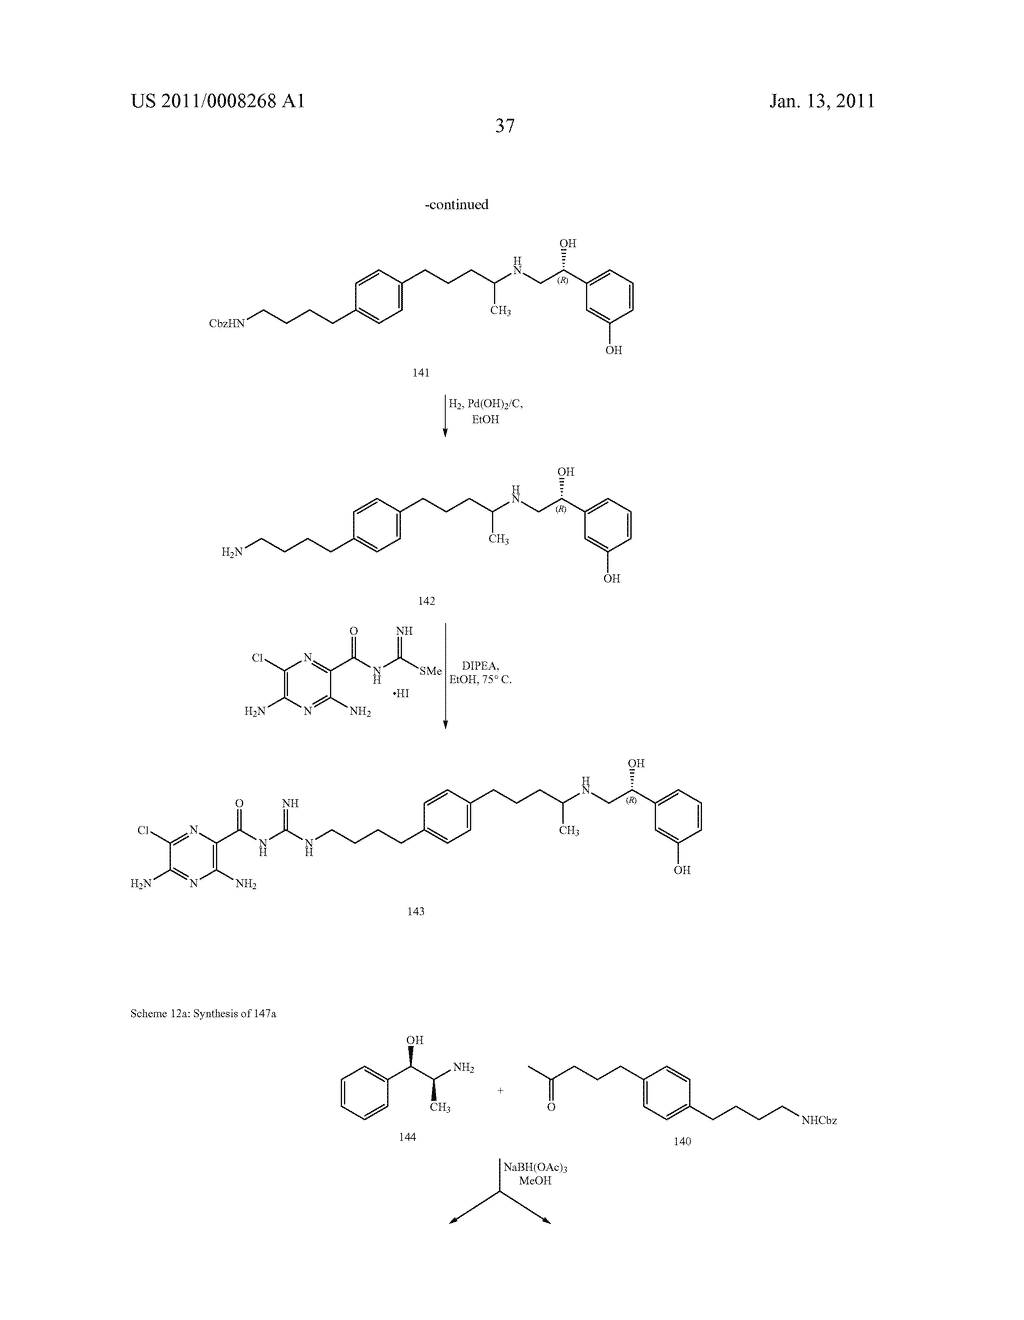 PHENYL SUBSTITUTED PYRAZINOYLGUANIDINE SODIUM CHANNEL BLOCKERS POSSESSING BETA AGONIST ACTIVITY - diagram, schematic, and image 42